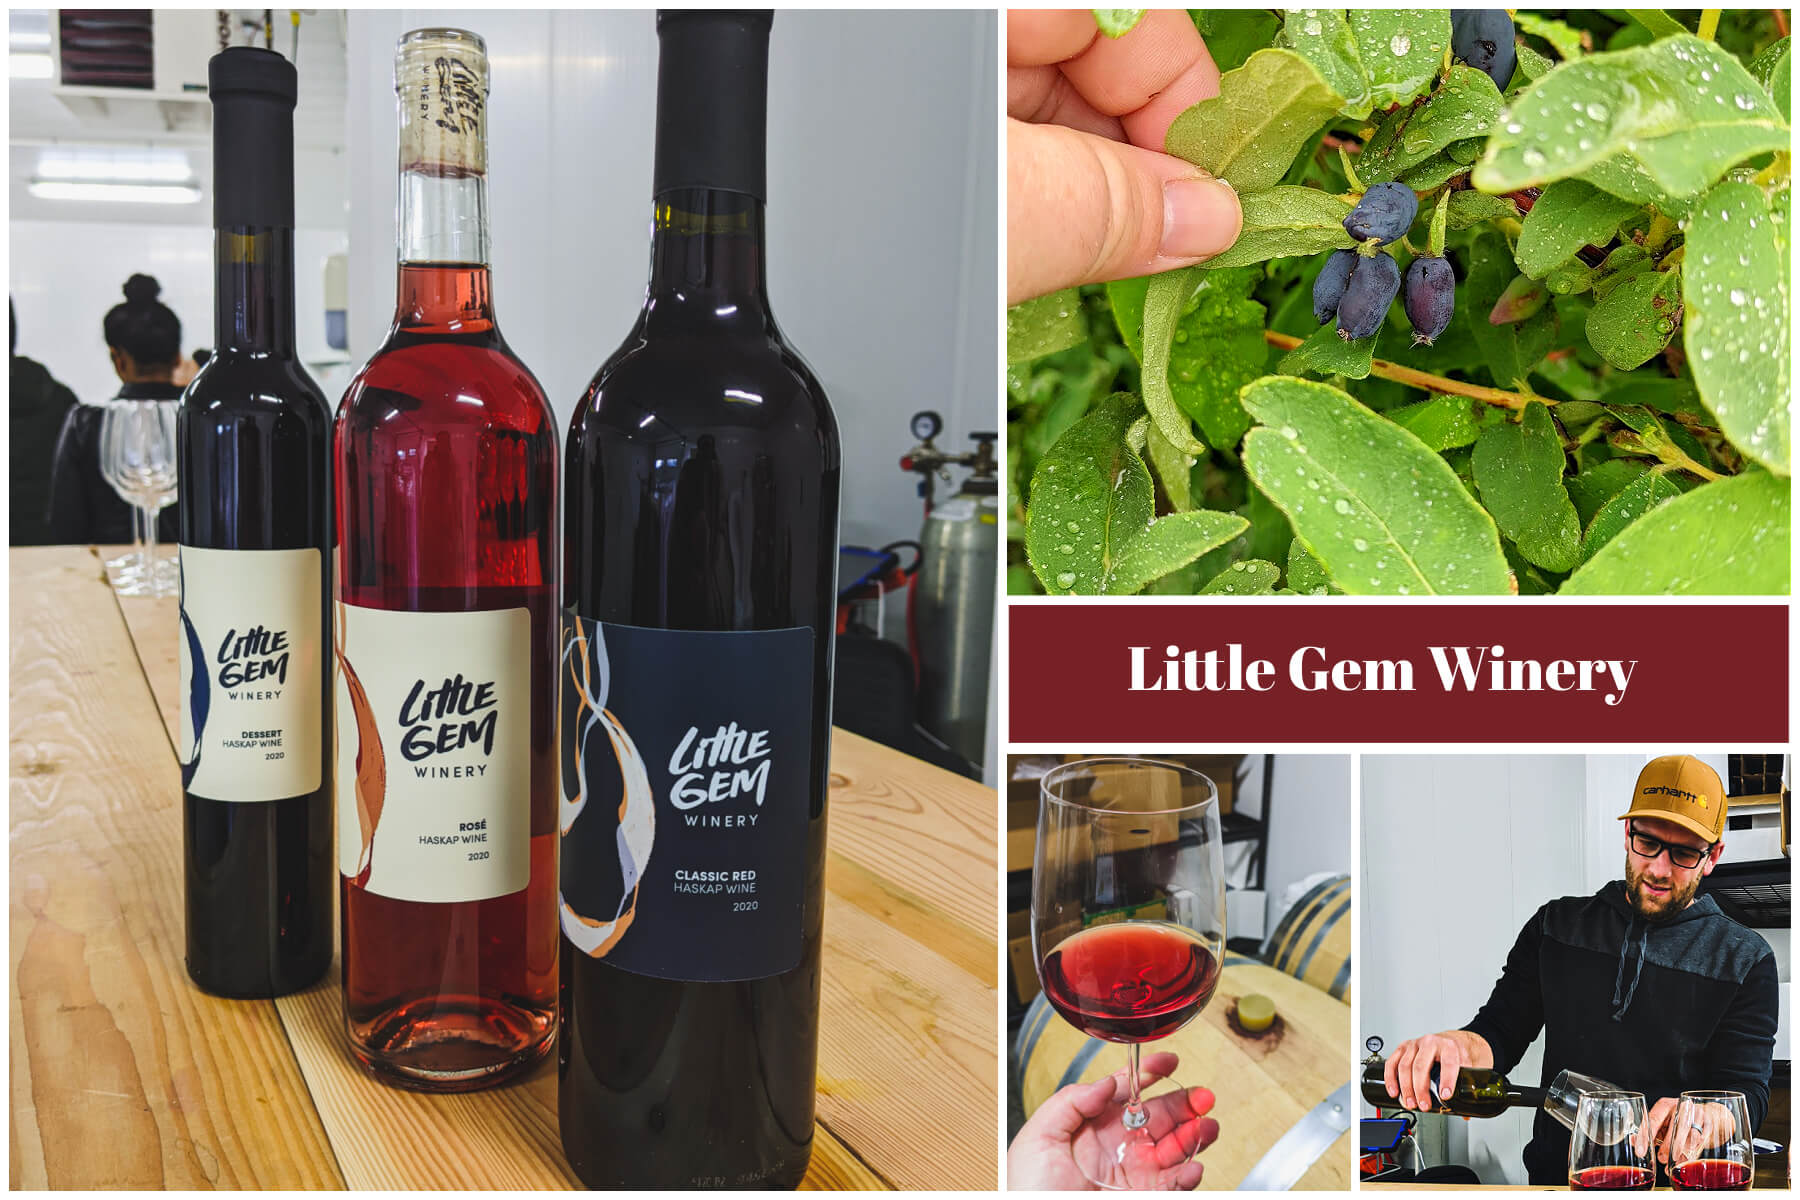 A collection of photos captured at Little Gem Winery.